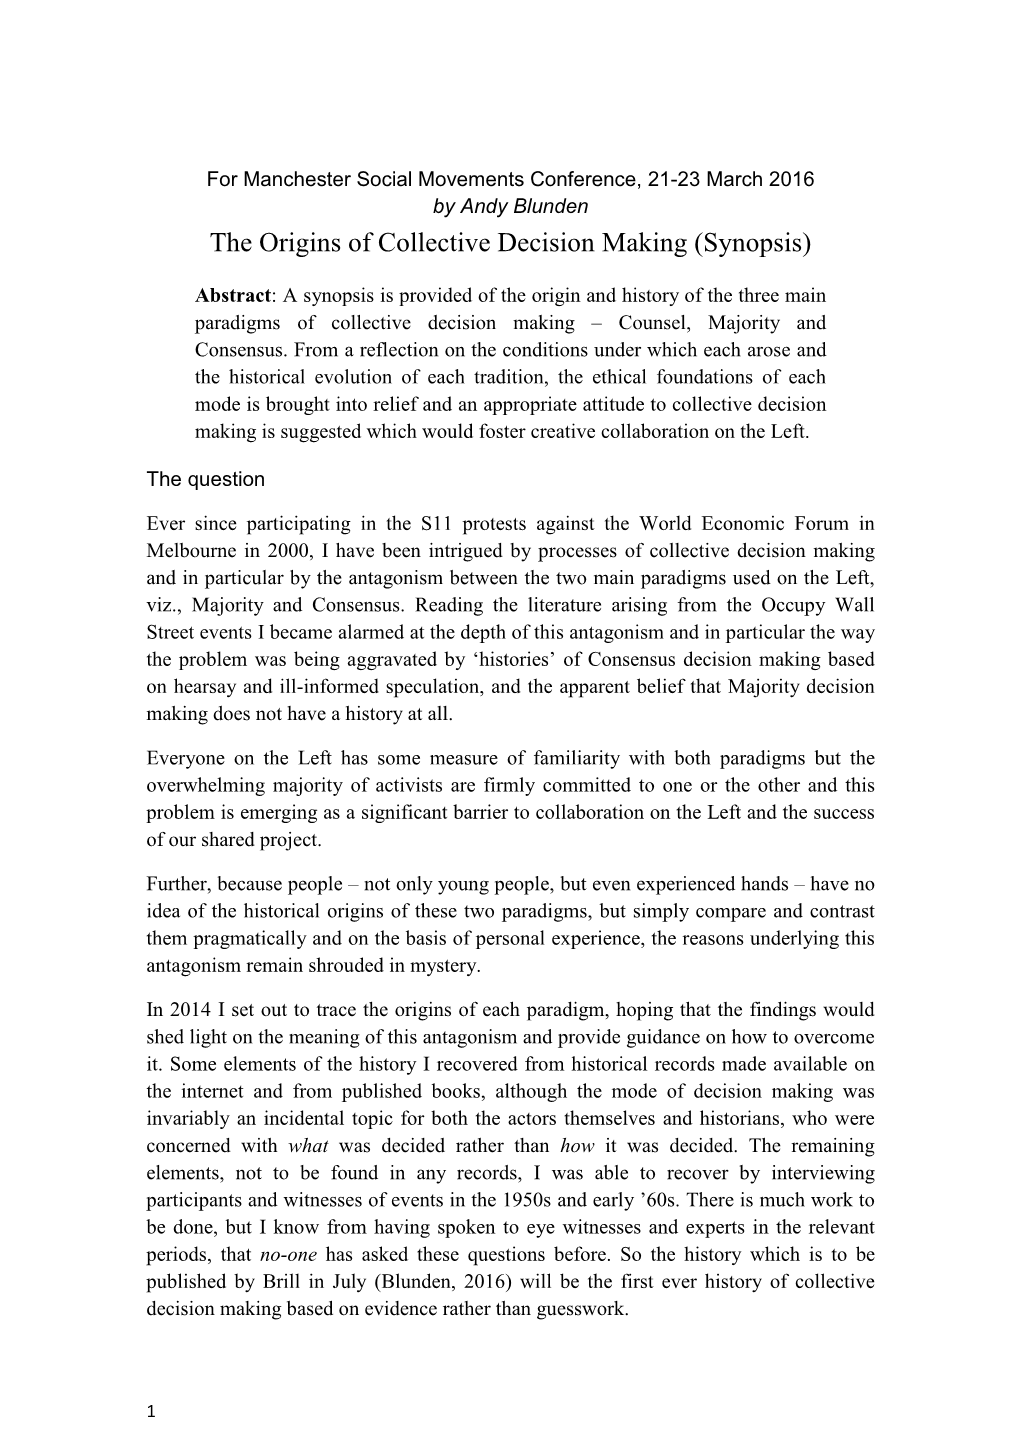 Paradigms of Collective Decision Making – Counsel, Majority and Consensus